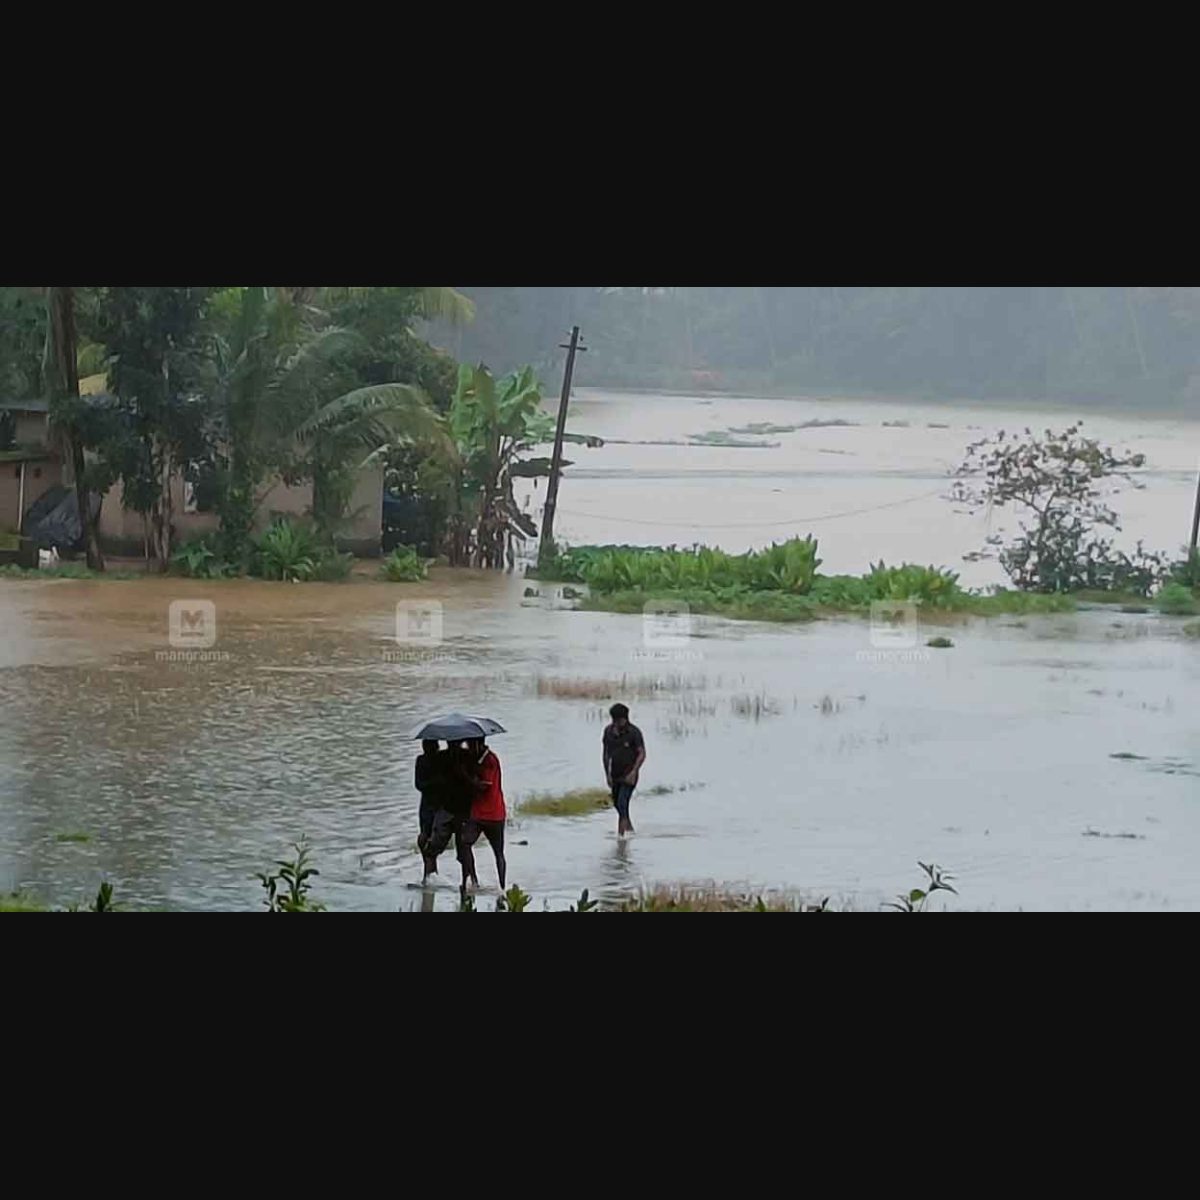 Kerala to receive heavy rain today; red alert in 4 districts ...